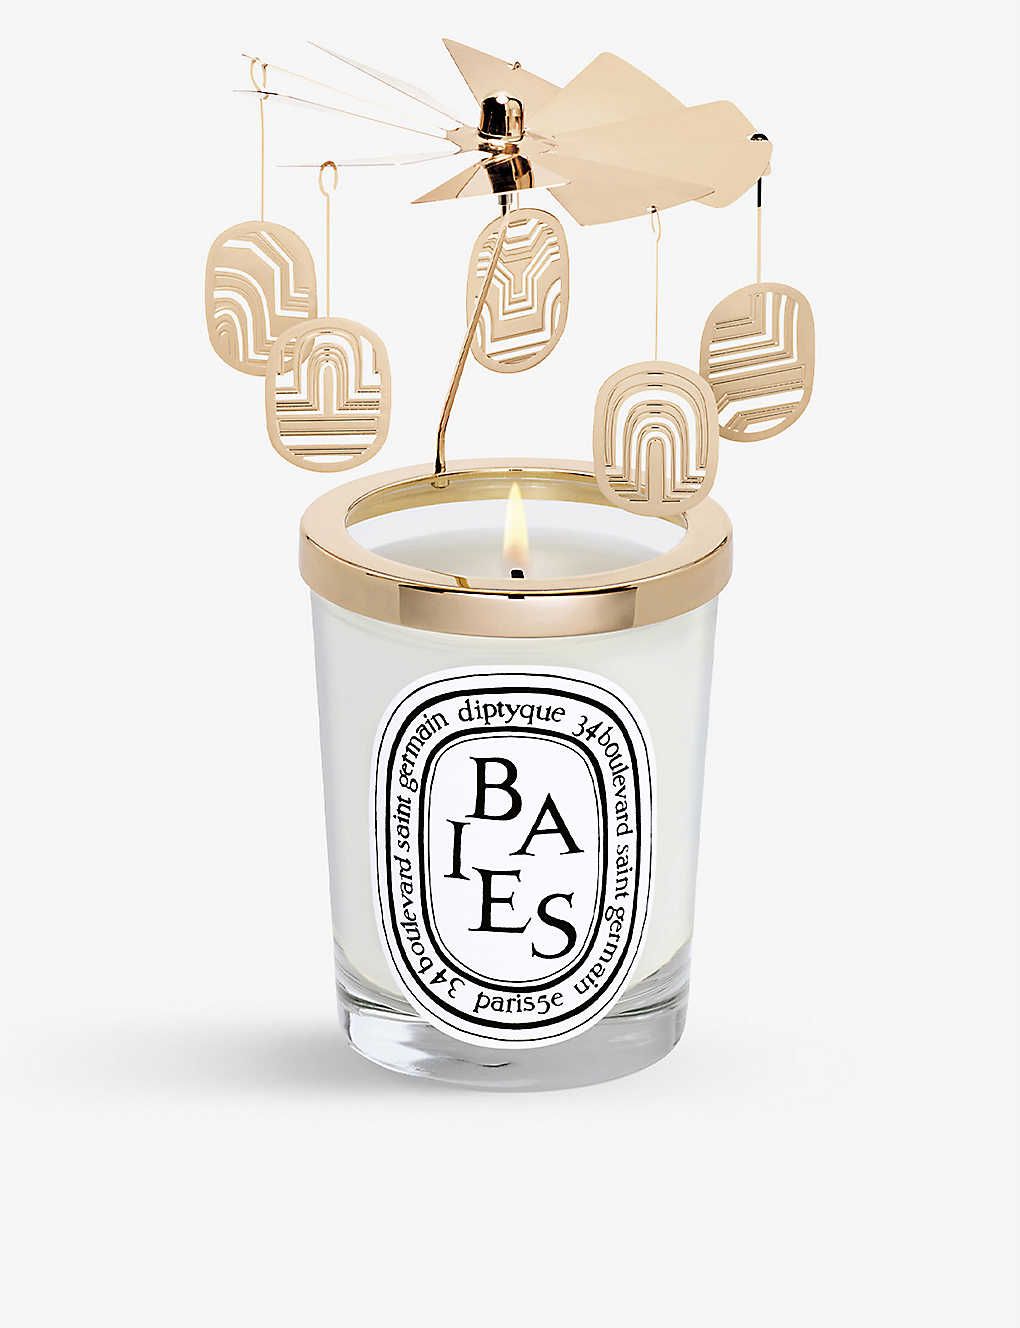 Carousel Baies scented candle 190g | Selfridges